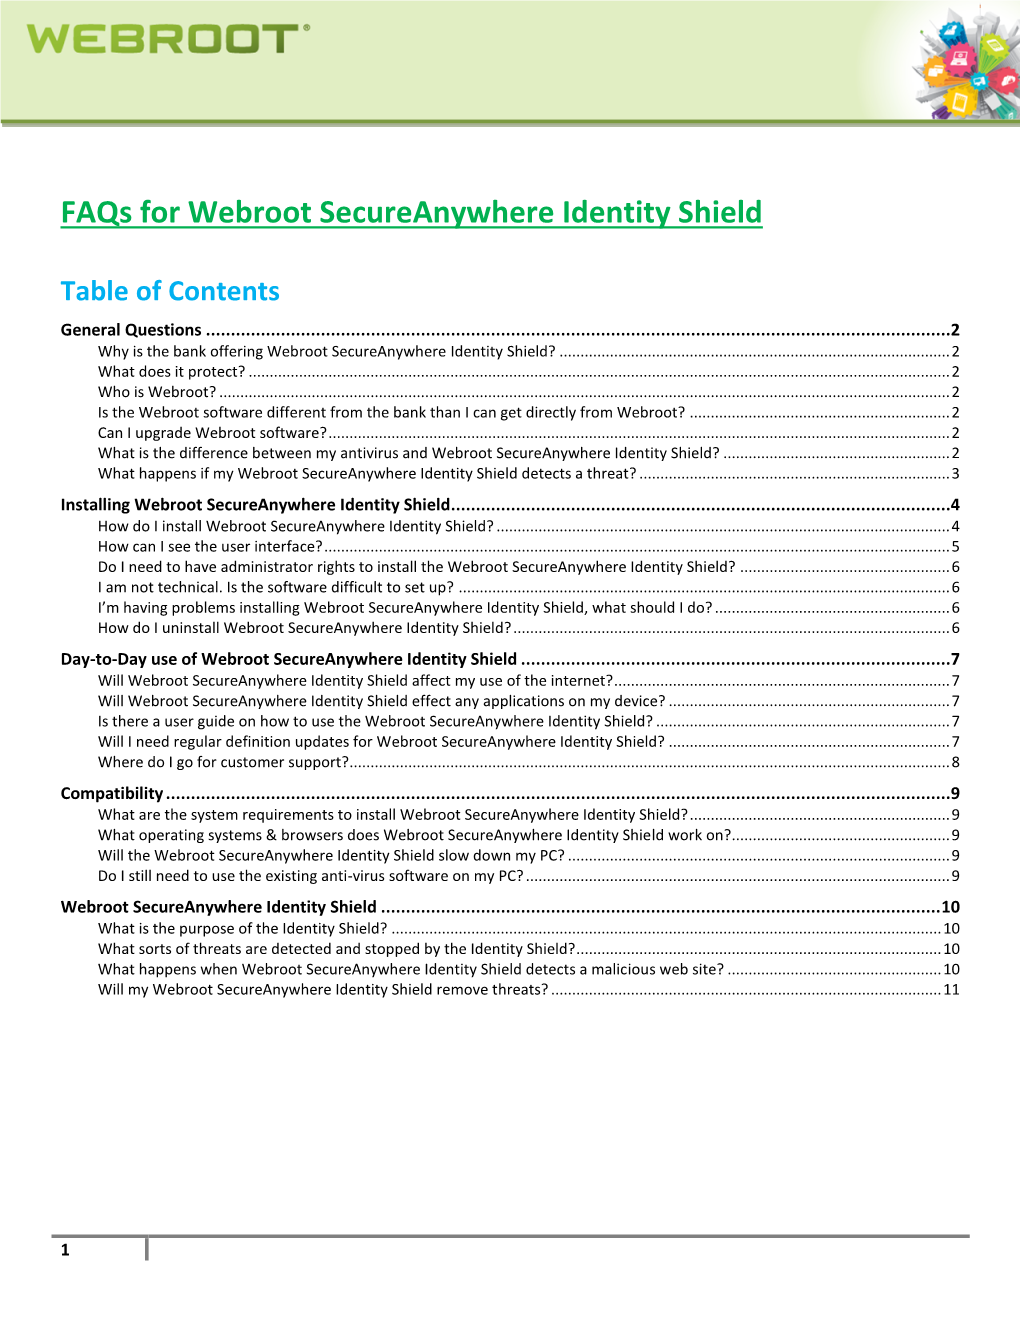 Faqs for Webroot Secureanywhere Identity Shield